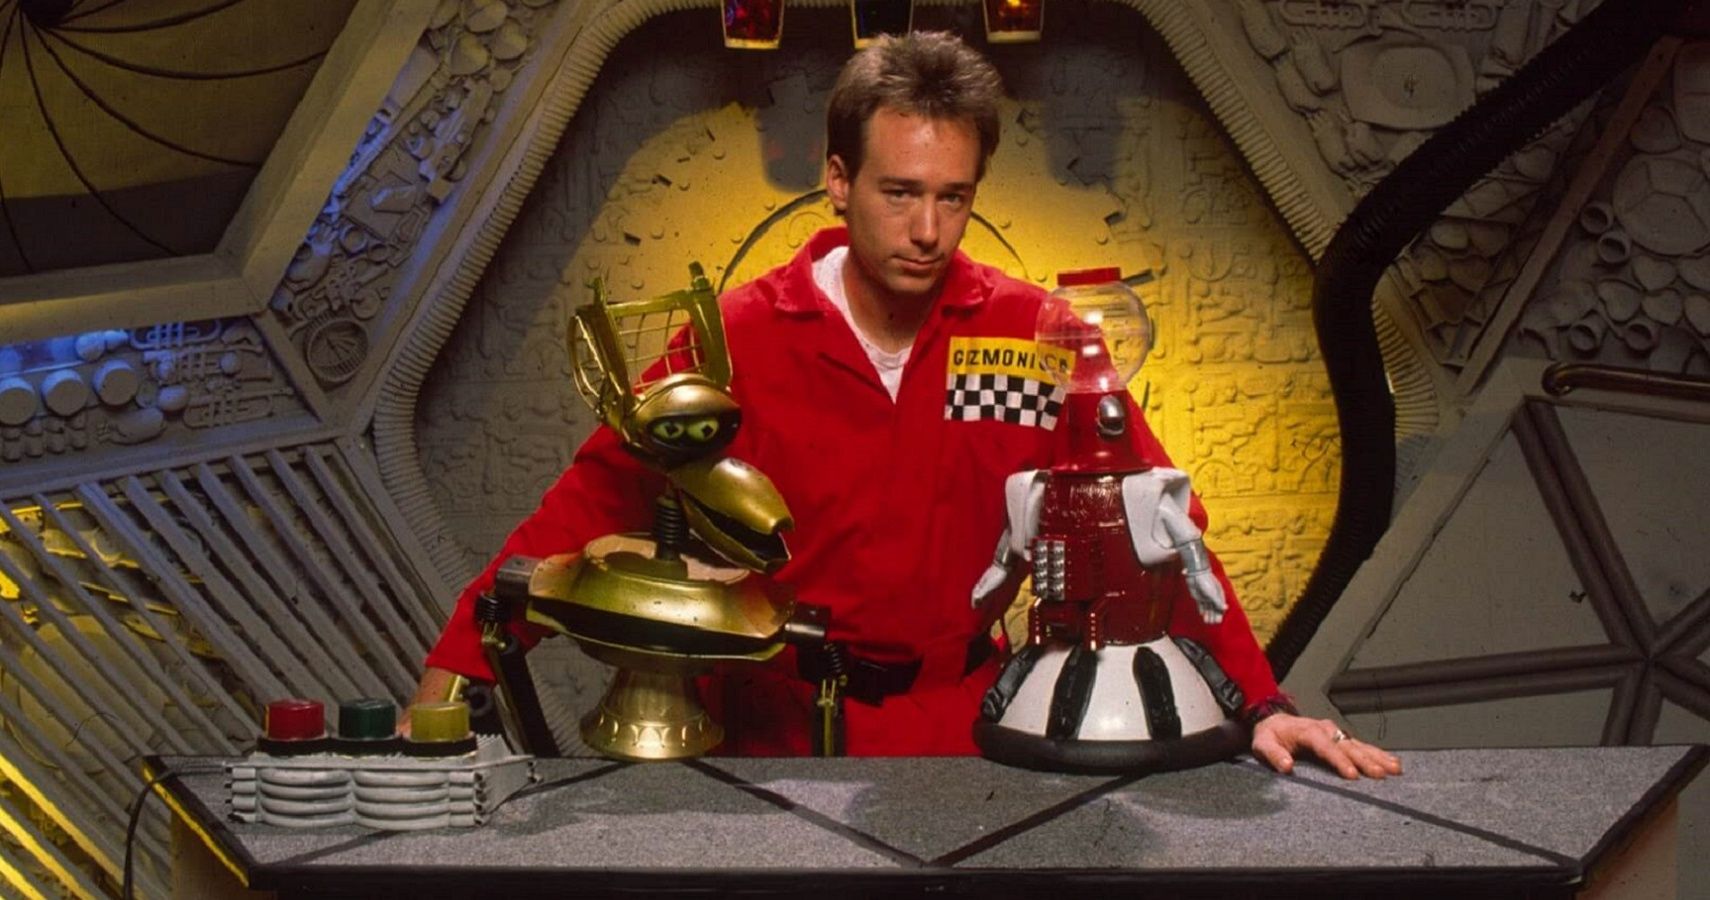 The 10 Most Iconic Joel Episodes of Mystery Science Theater 3000 According To IMDb